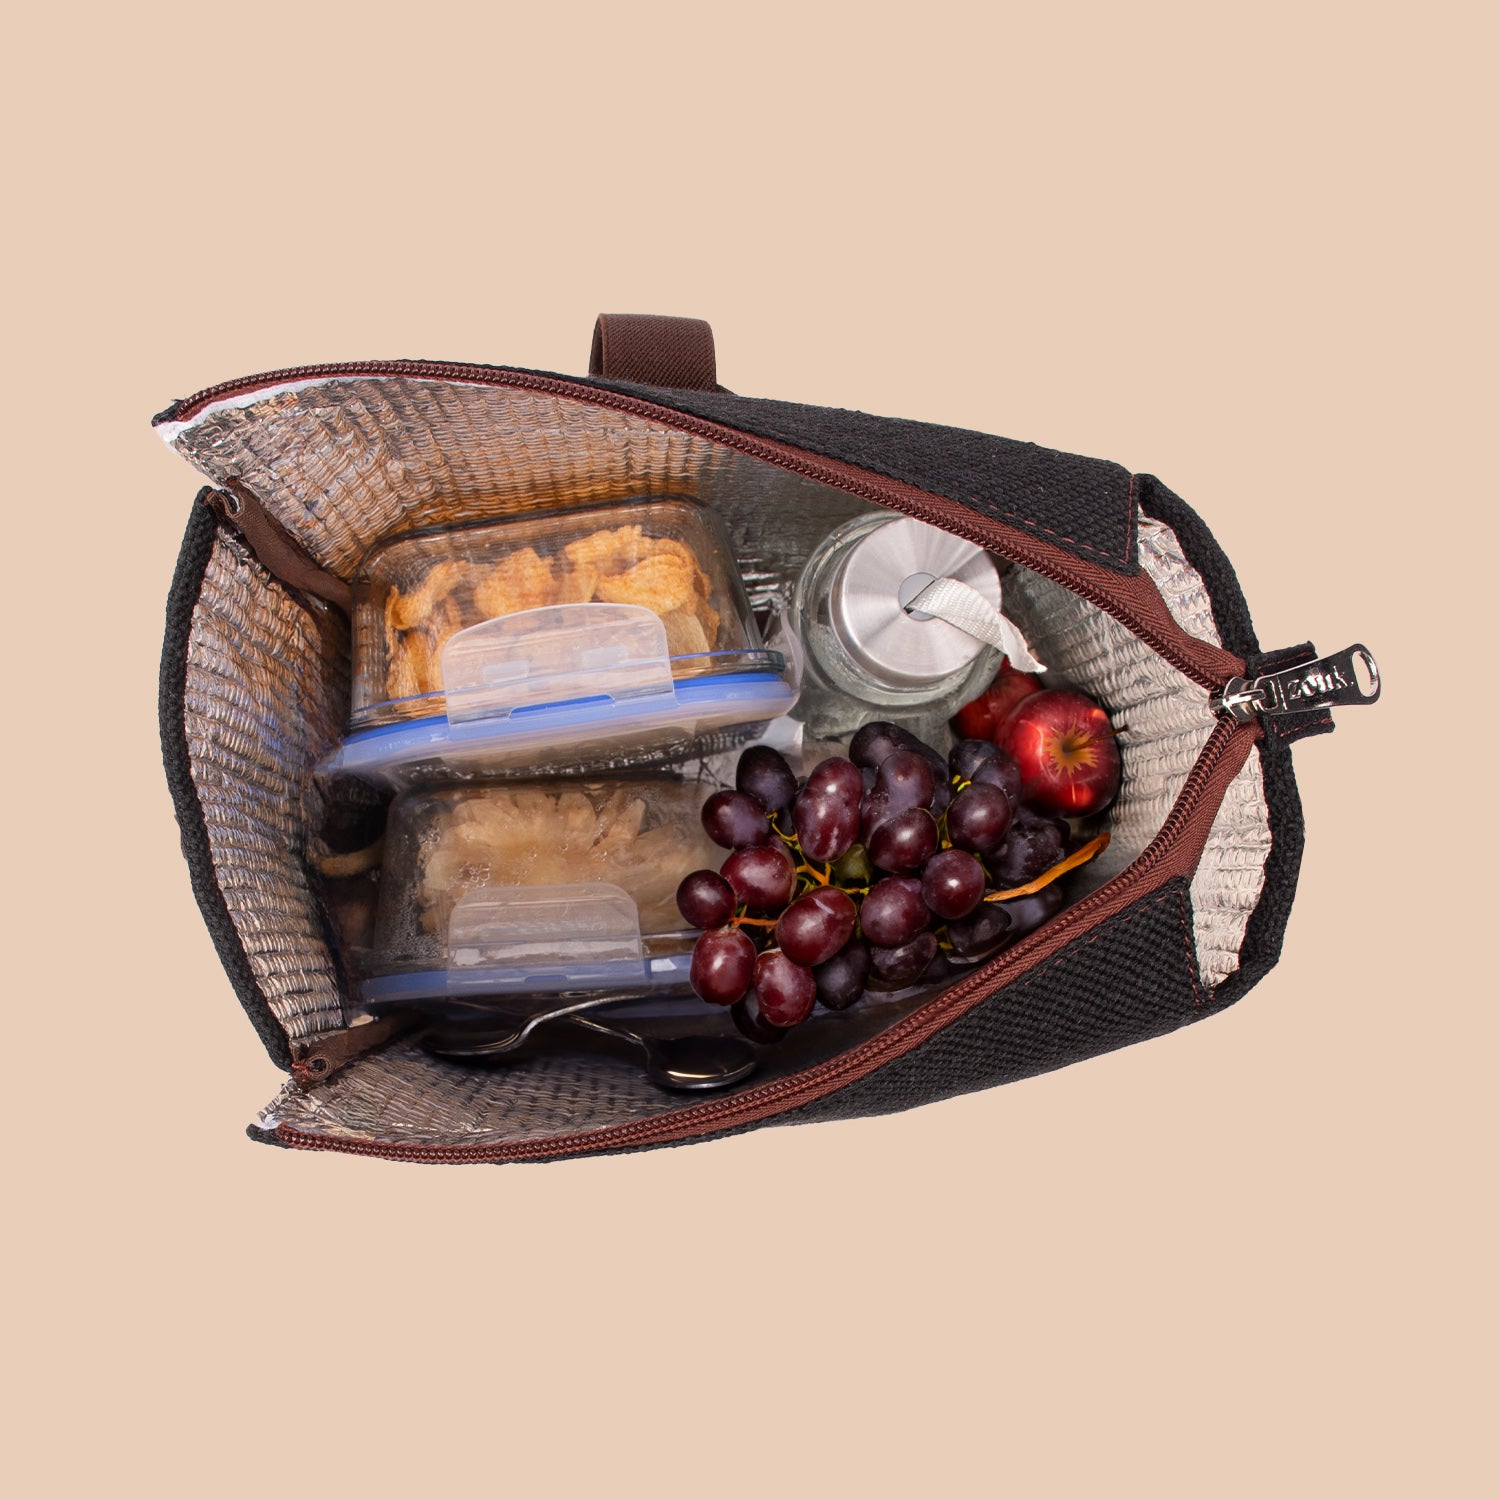 Kutch Gamthi Roll Up Lunch Bag